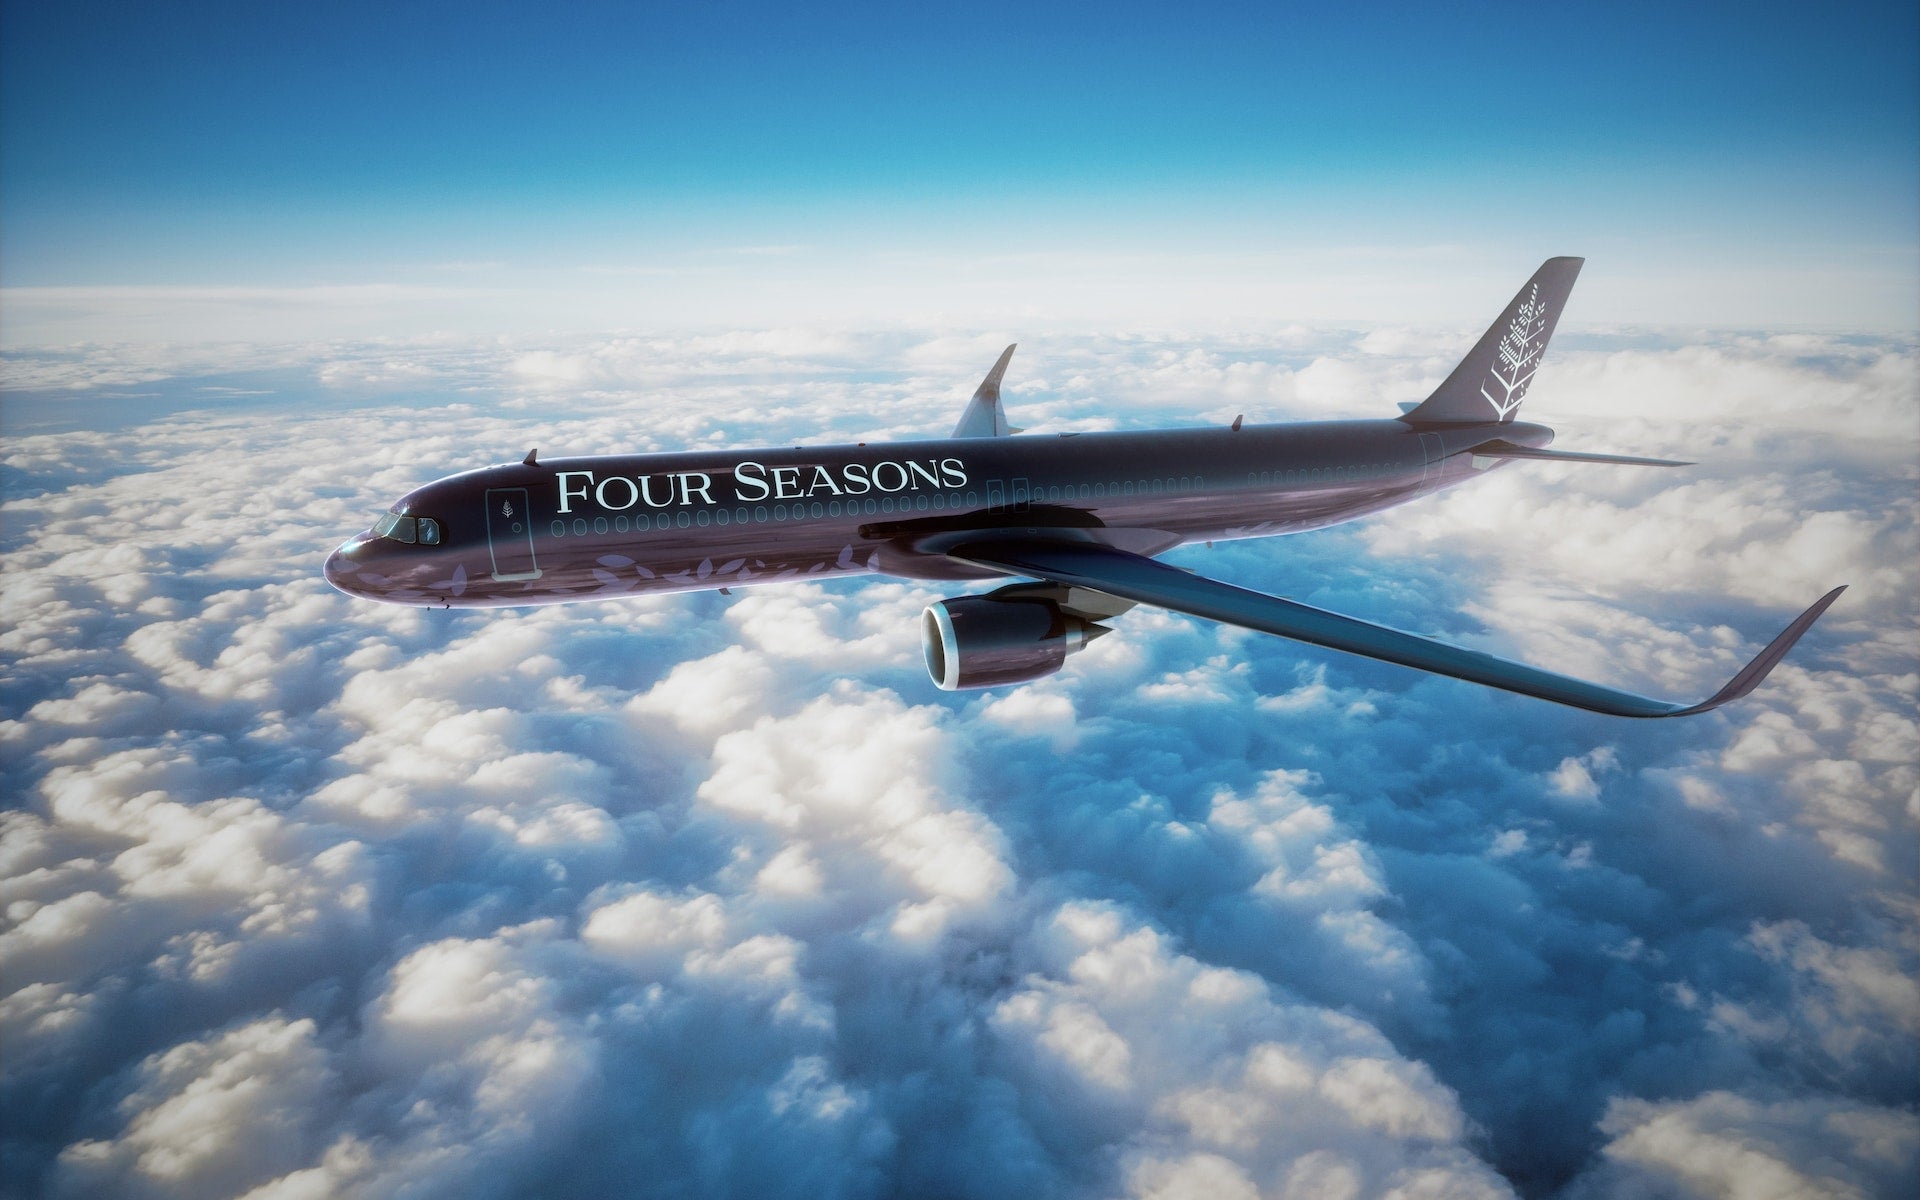 Four Seasons unveils 2022 private-jet itineraries aboard custom Airbus A321LR